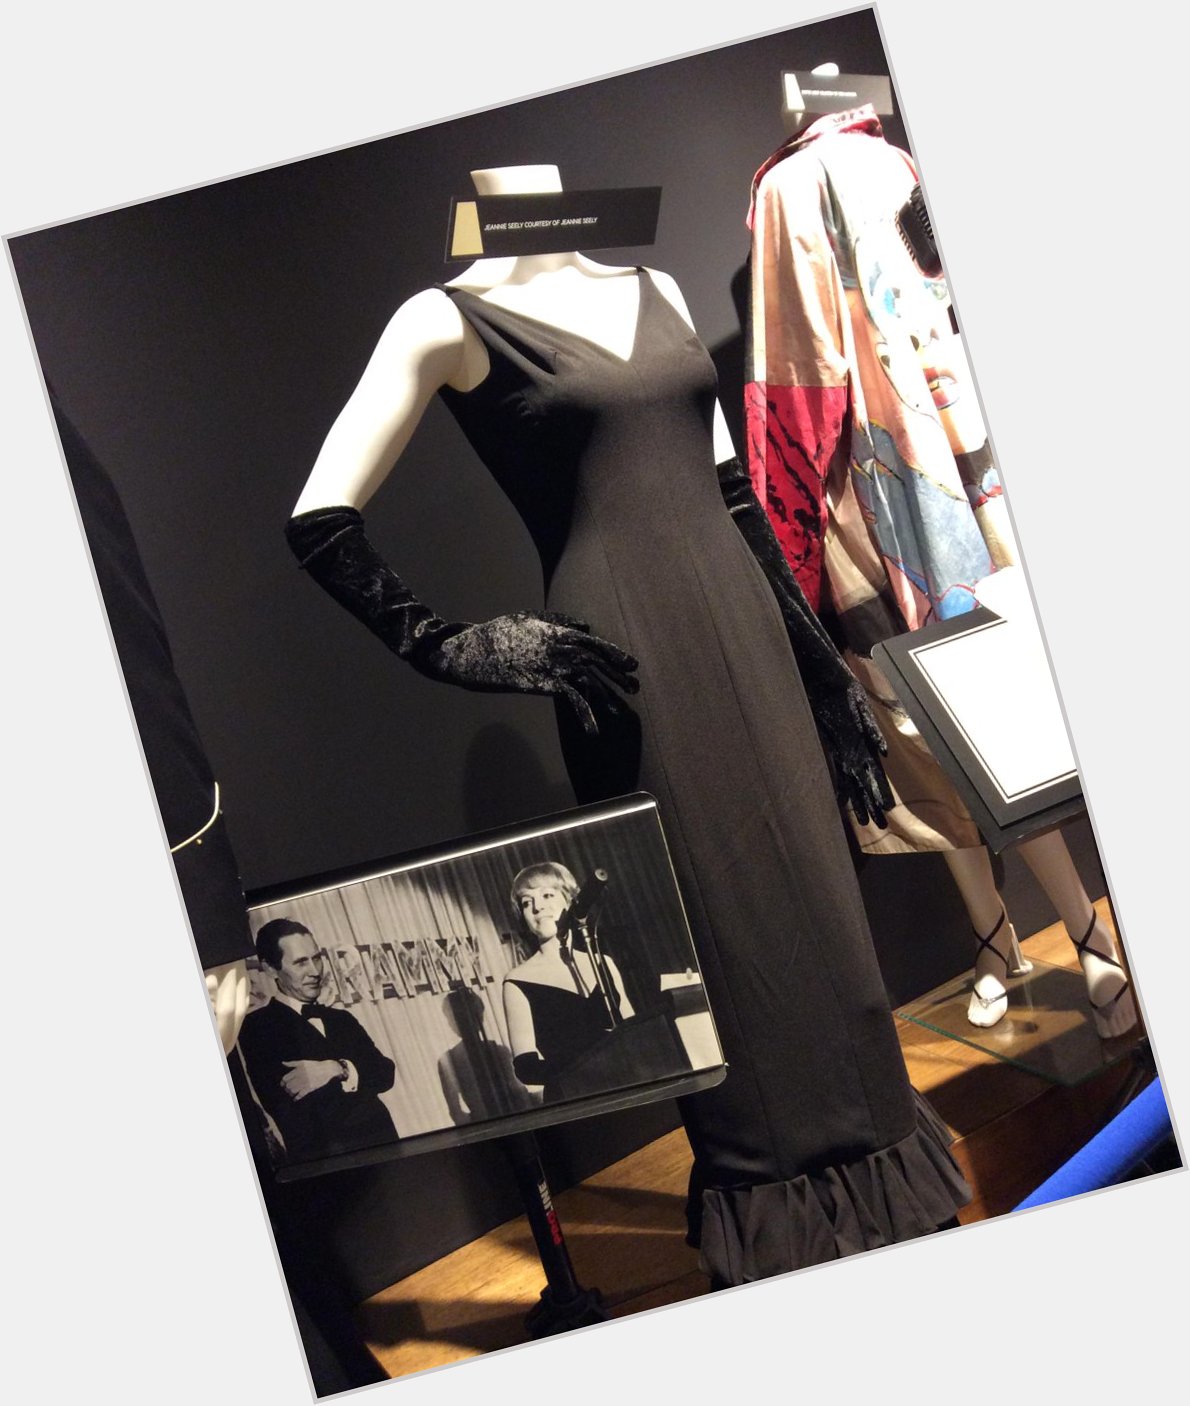 \"Honored to have on display [@ MHFM] the black dress I wore at the 9th - Jeannie Seely. Happy birthday! 